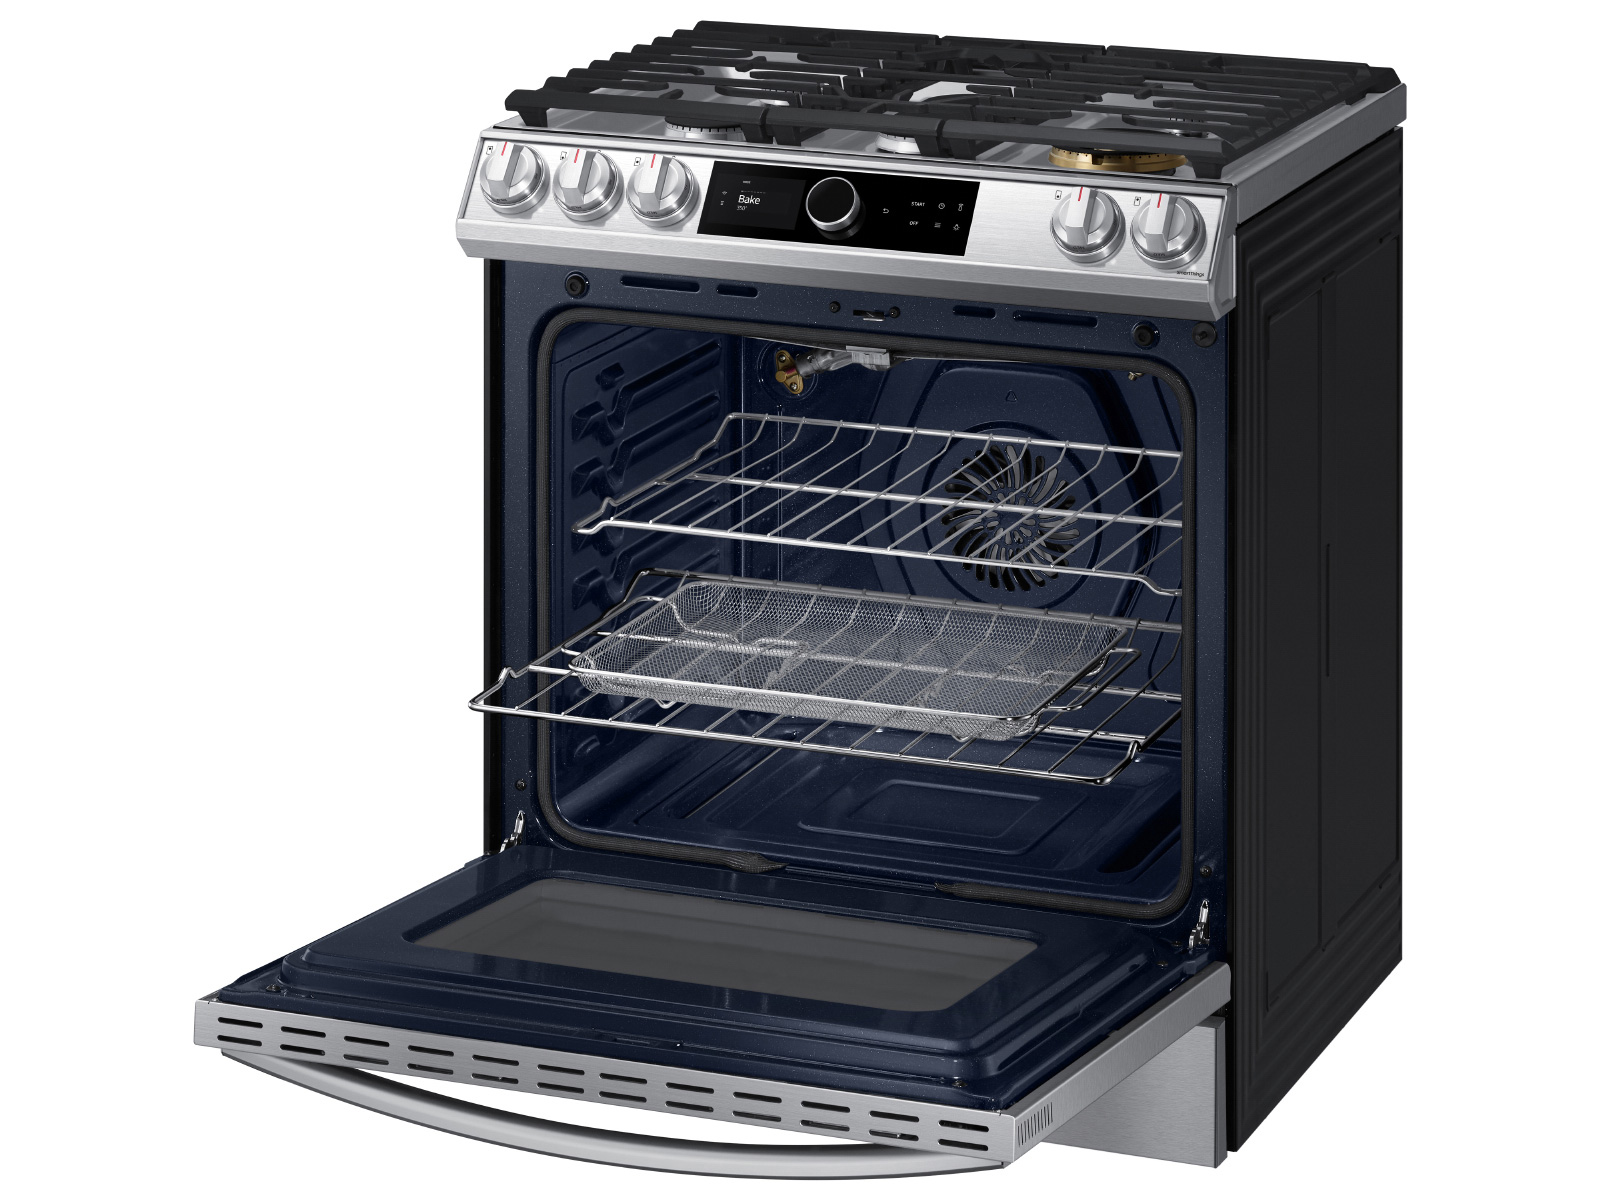 Therma Tek 6 Burner Gas Range with Convection Oven